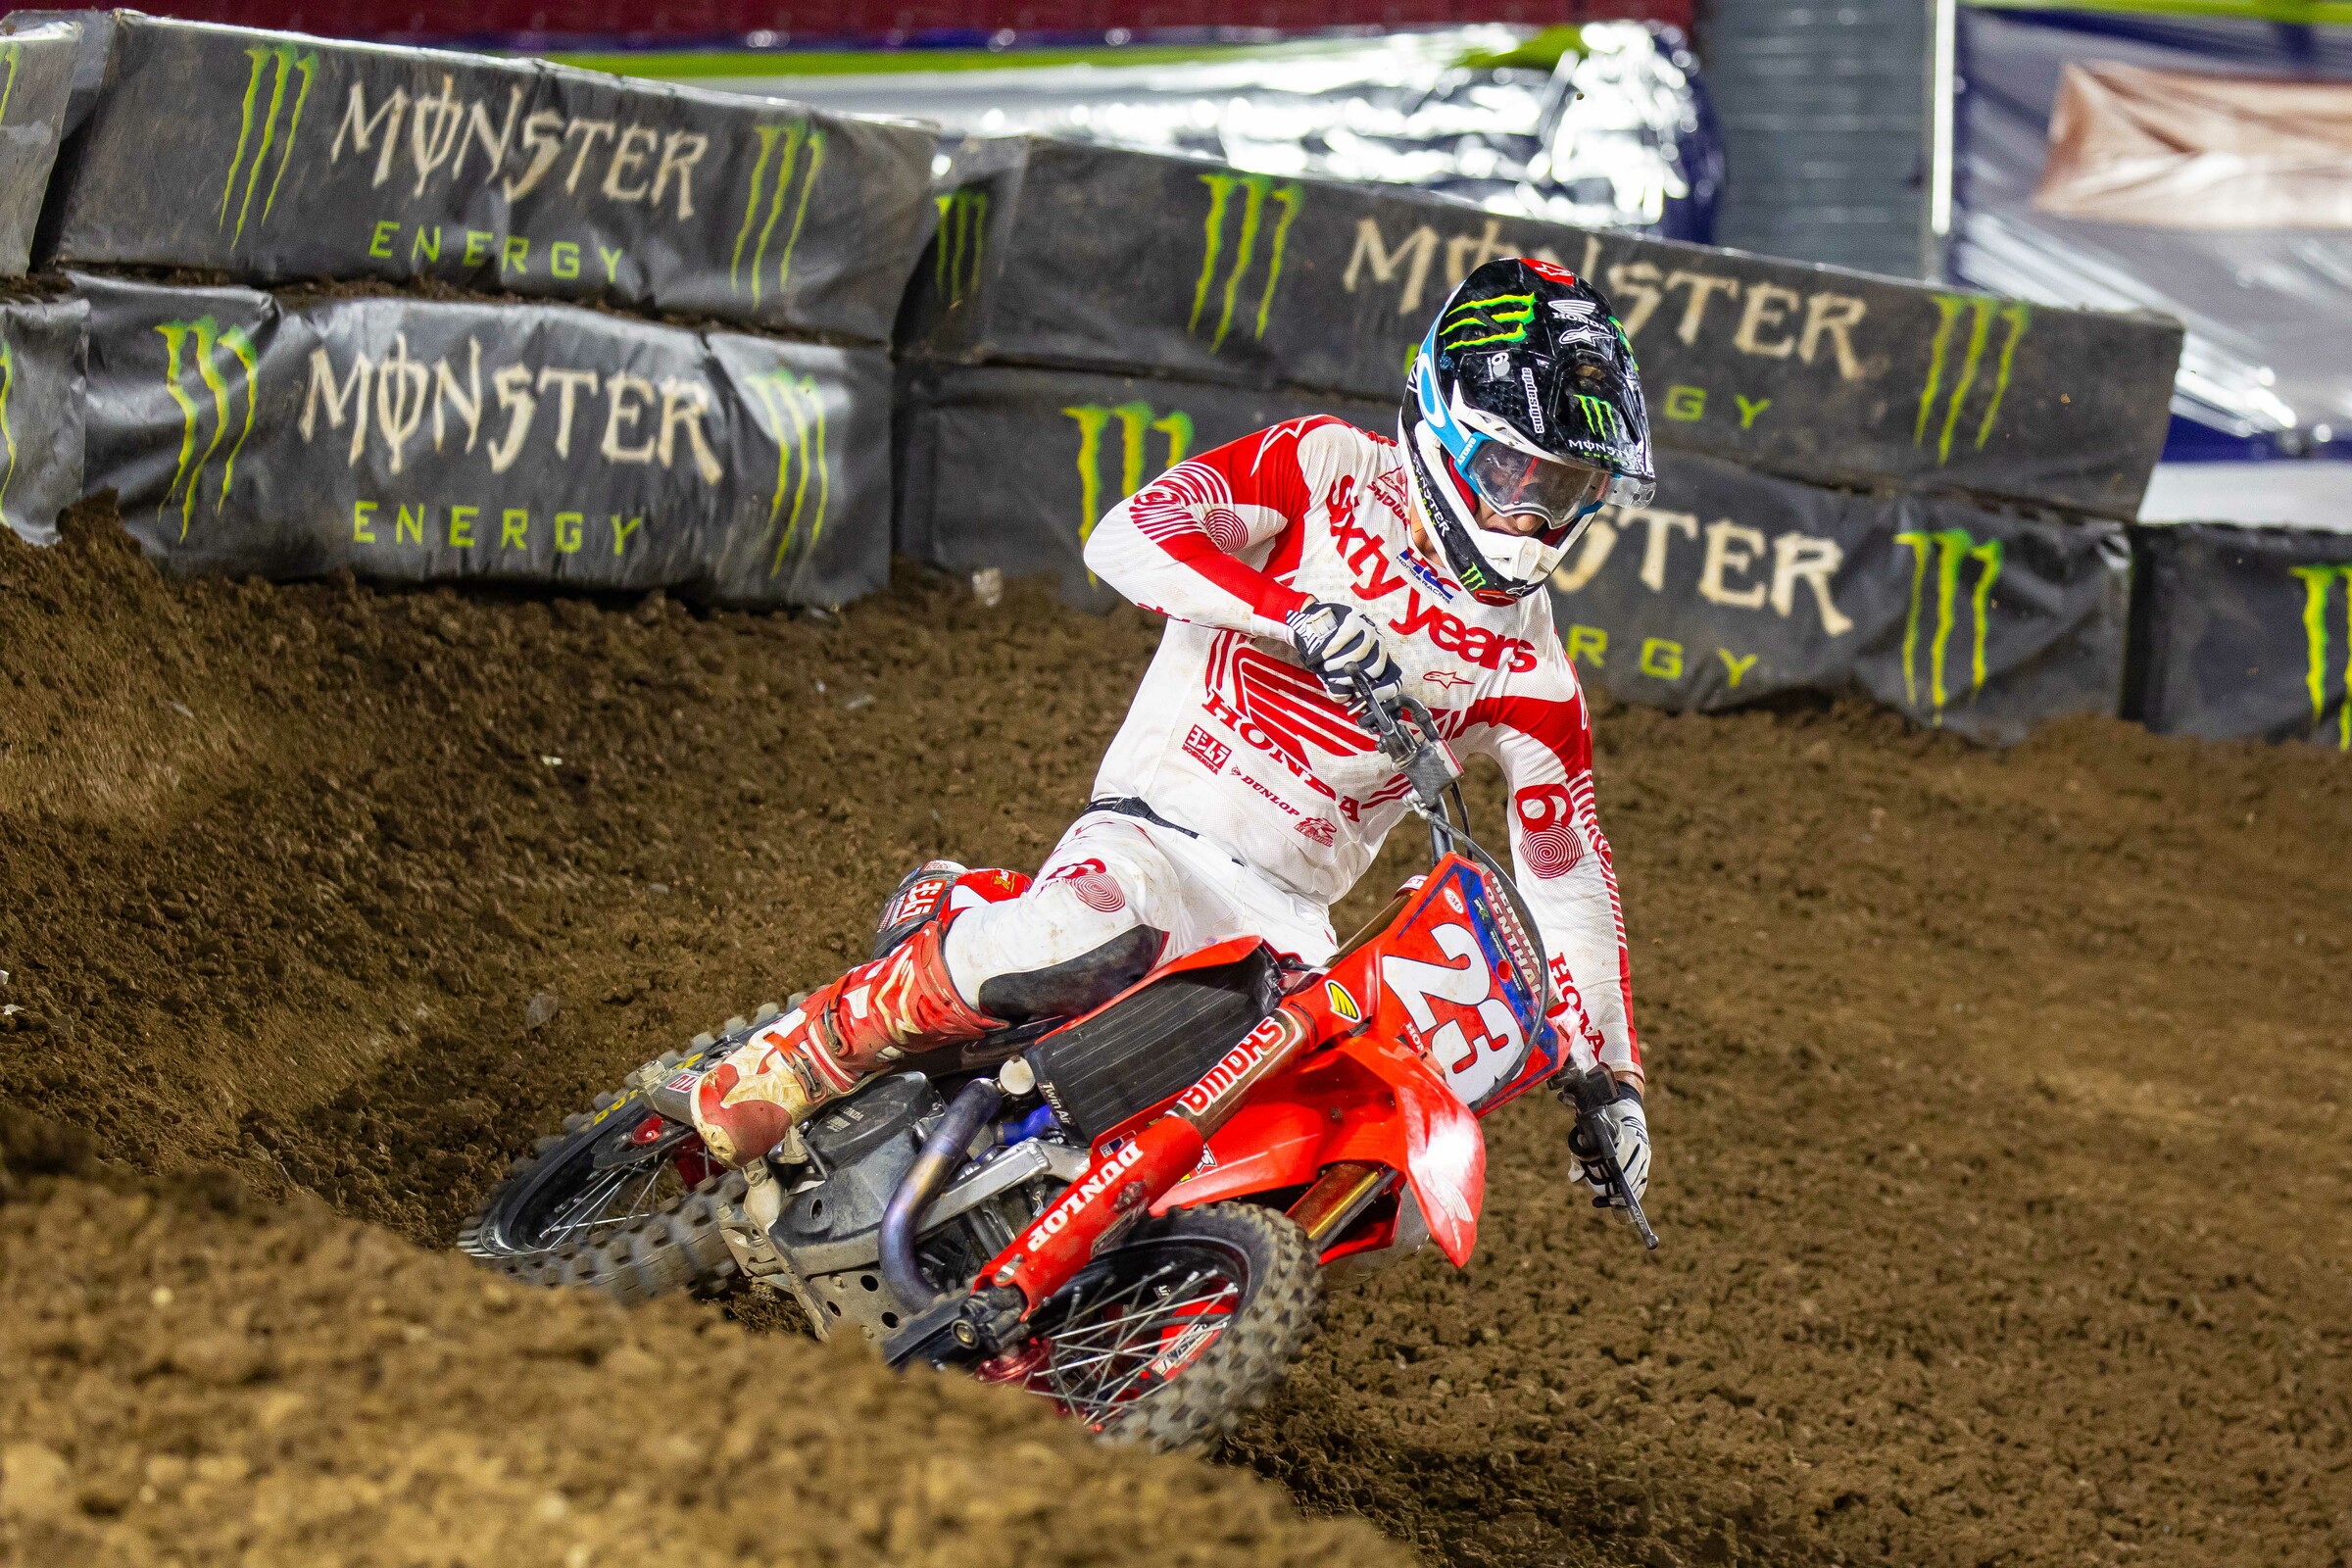 Craig, Dungey, and Weigandt to Preview MXoN on PulpMX Show Tonight